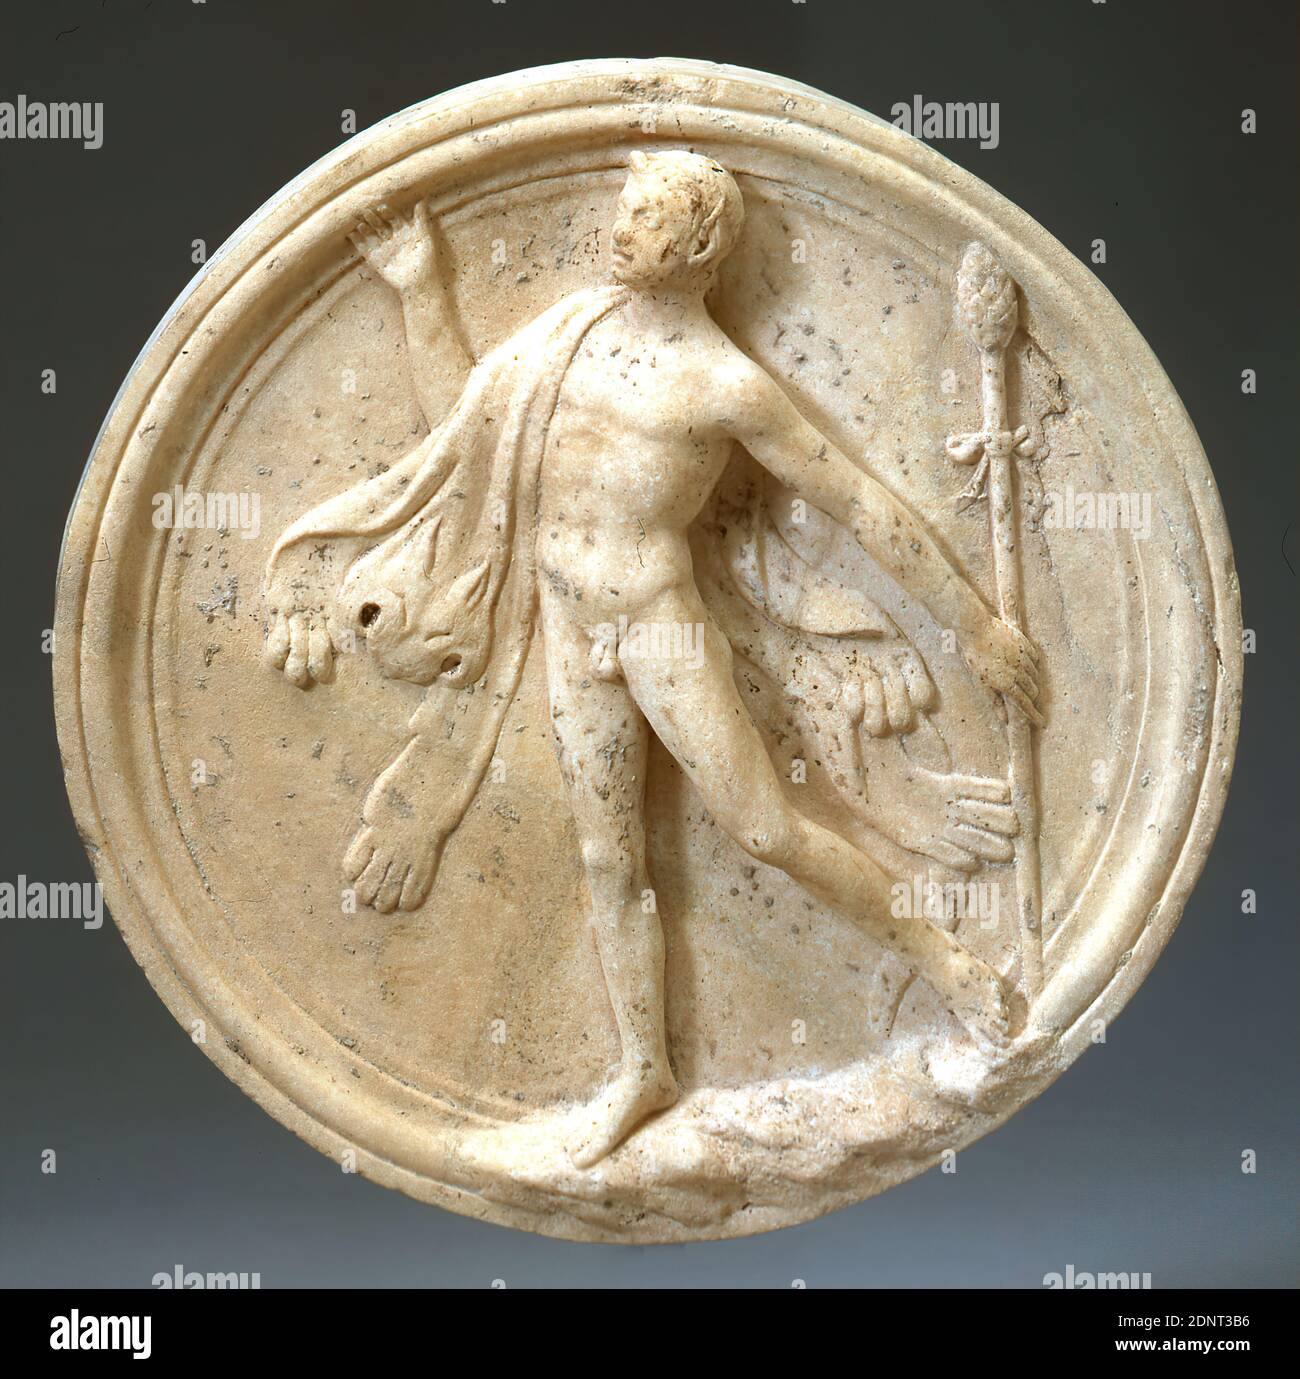 Oscillum (Satyr), Marble, chiseled, smoothed, Marble, Total: Height: 6 cm; Diameter: 35.5 cm, Reliefs, Three-dimensional sculptures, Garden and park, Ornamental objects, Satyrs, Fauns, Silene, Early Imperial Period, Roman Antiquity, The disc belongs to the genus Oscilla. In archaeology it is understood to be objects and reliefs, which were usually hung in the intercolumnar spaces of porticoes (Lat. porticus). Their manner of attachment can be reconstructed from Roman wall paintings and isolated find situations. Stock Photo